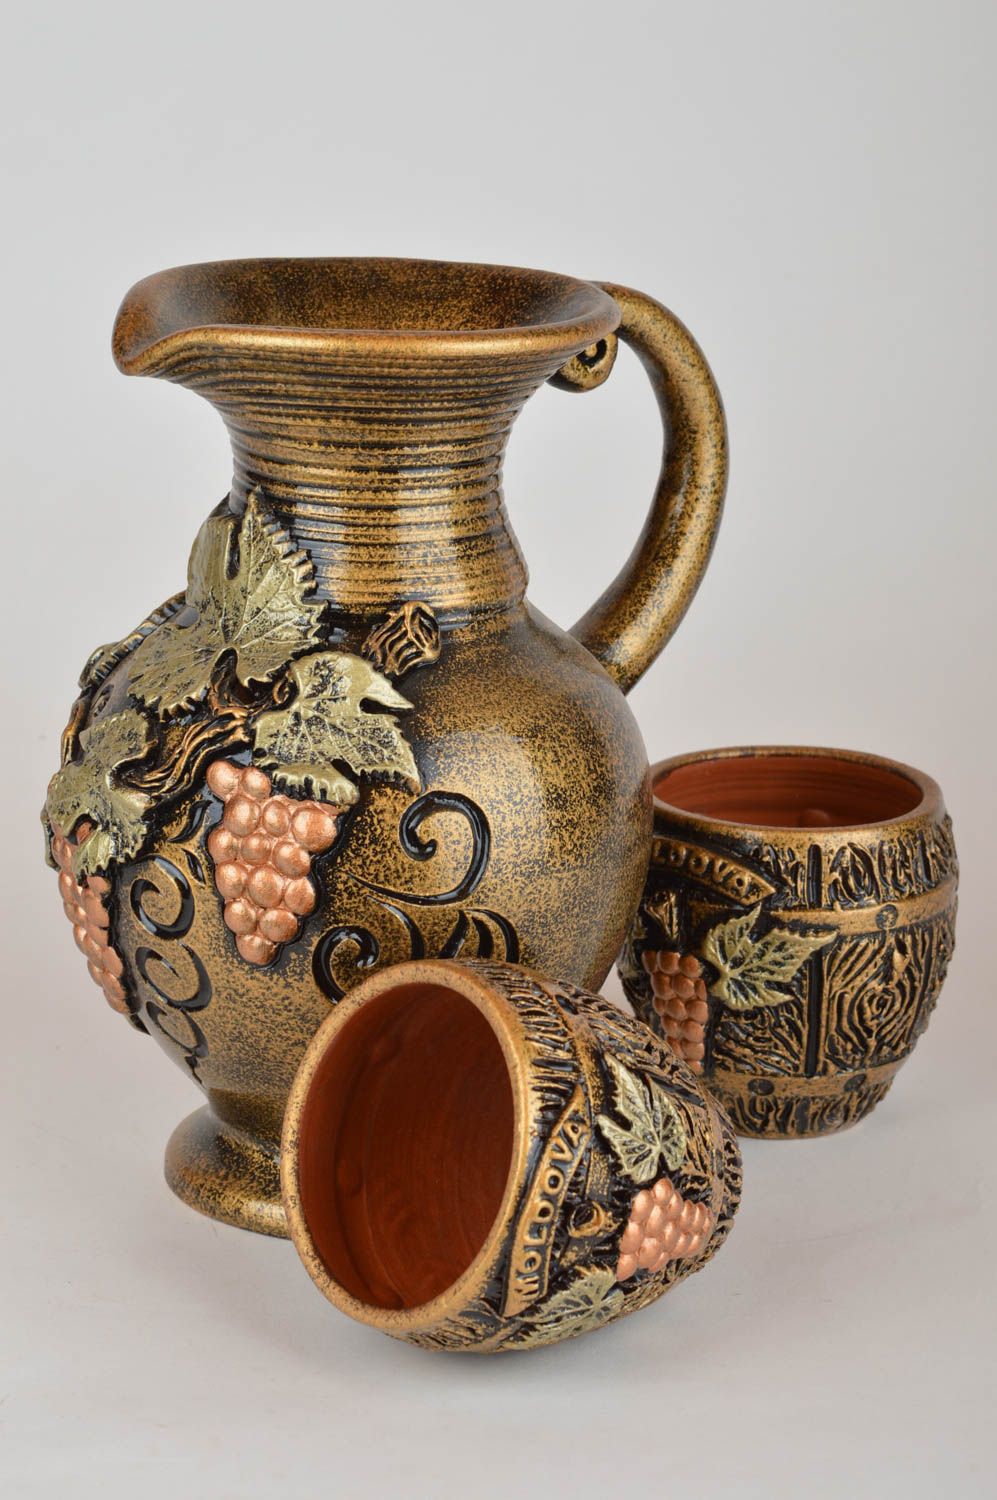 60 oz ceramic wine pitcher with two wine cups in gold color with moded décor 4 lb photo 5